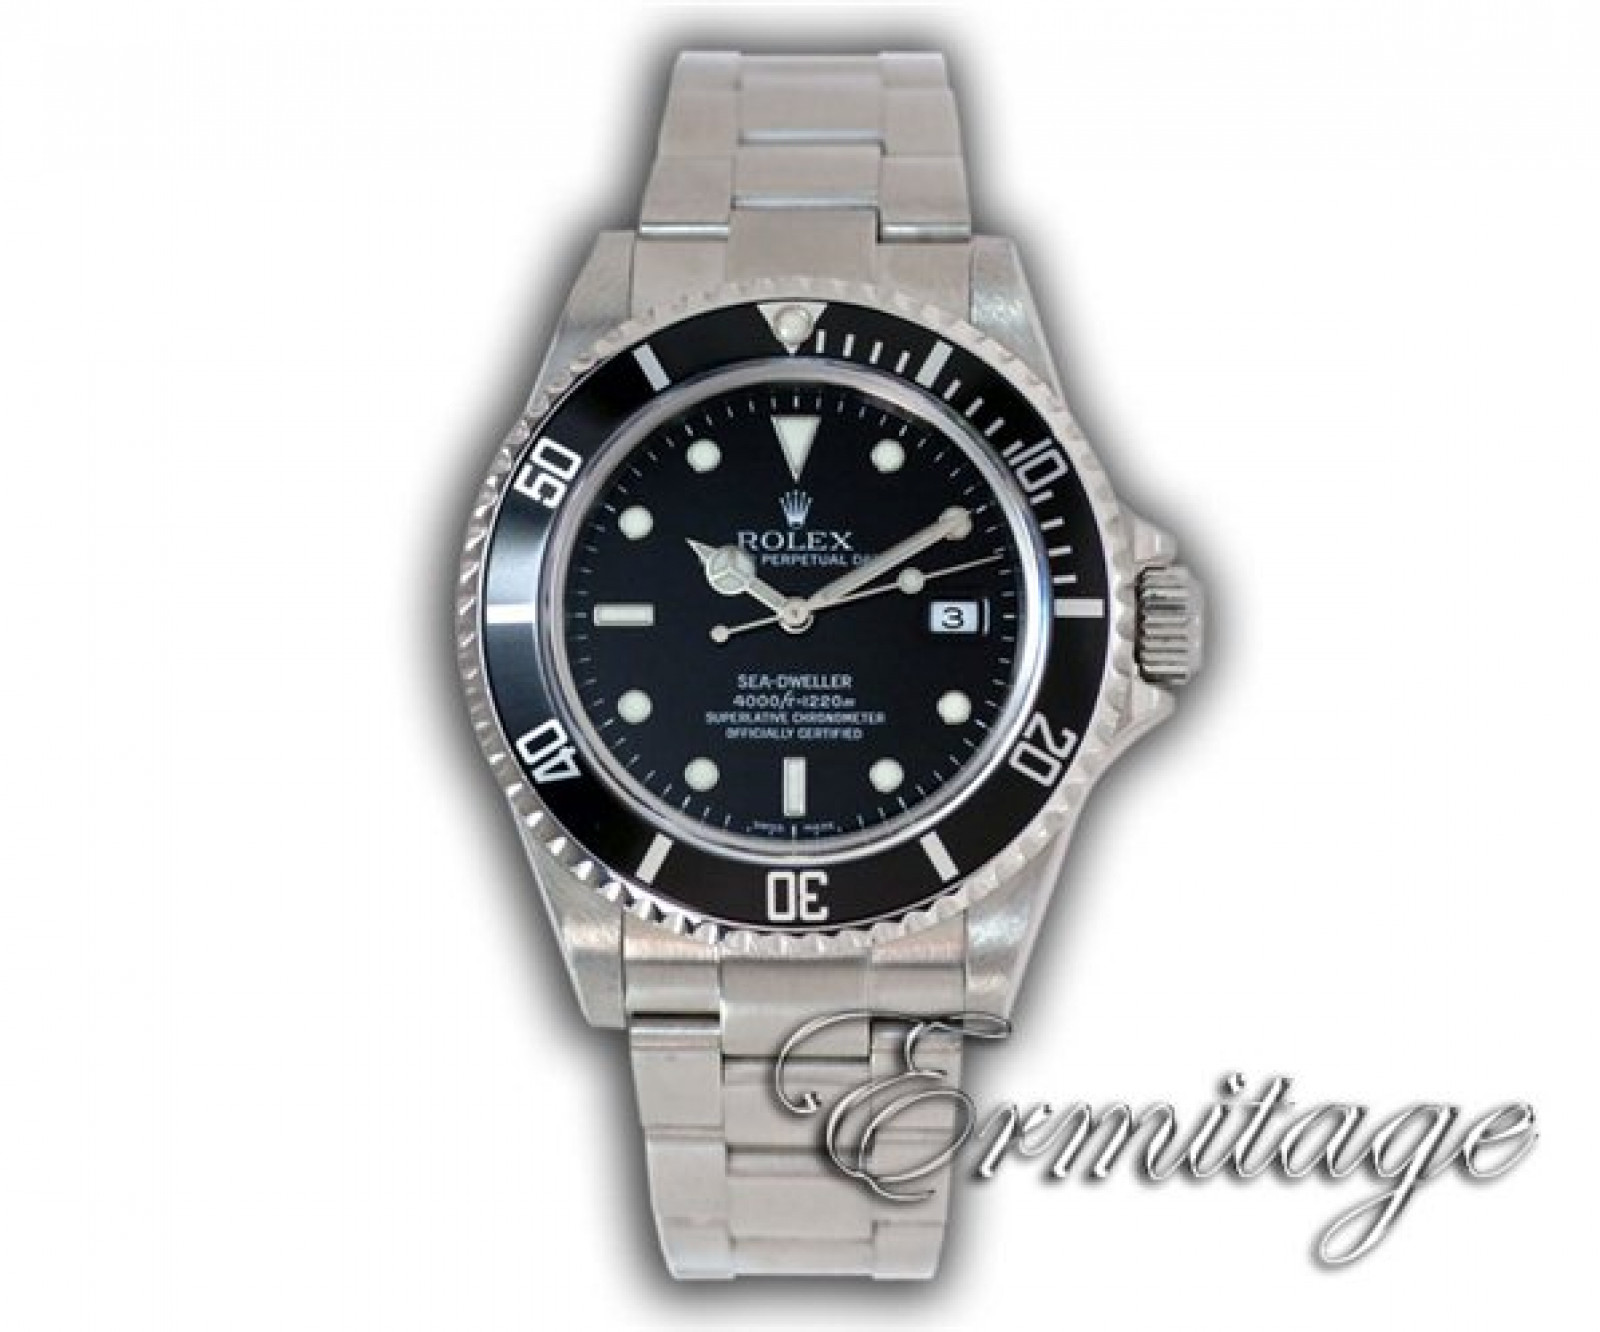 Pre-Owned Rolex Oyster Perpetual Sea-Dweller 16600 Steel Year 2005